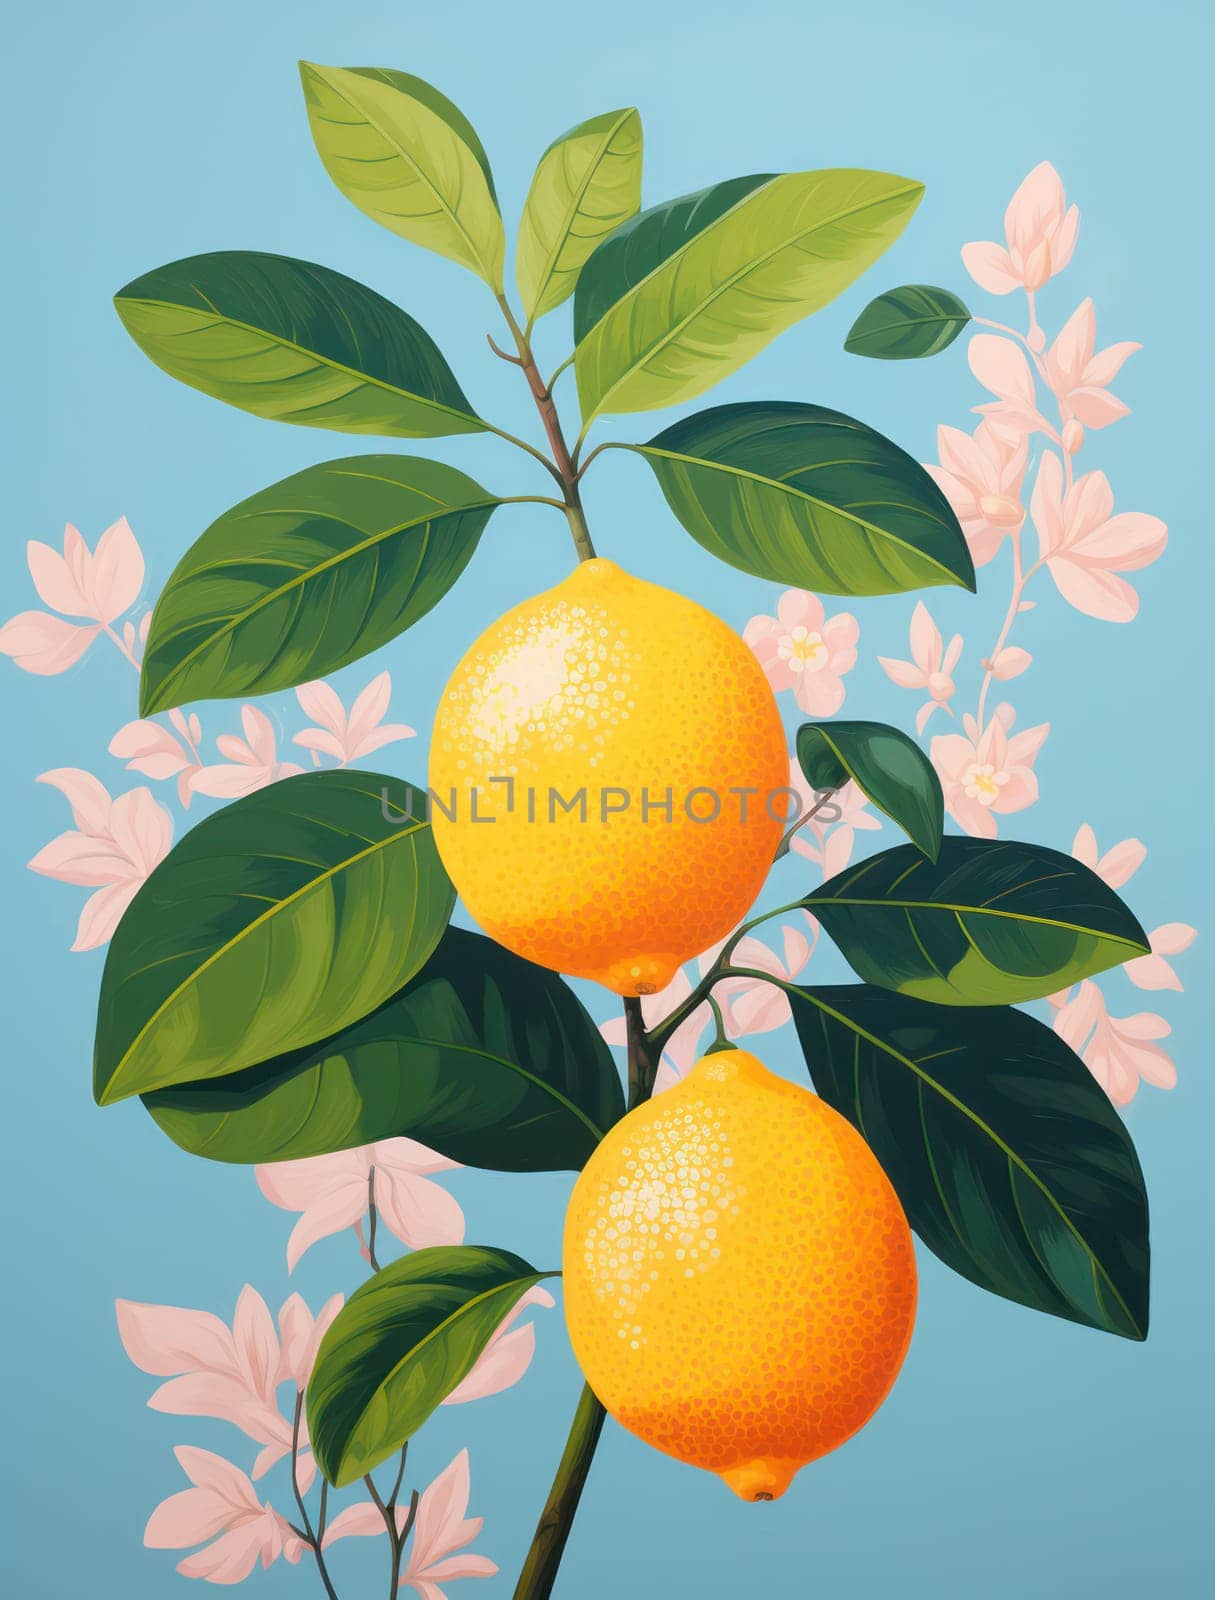 Intricate Citrus Harvest: Fresh Lemon Tree Branch with Yellow Fruits, Blossom, and Green Leaves on a Seamless Tropical Background